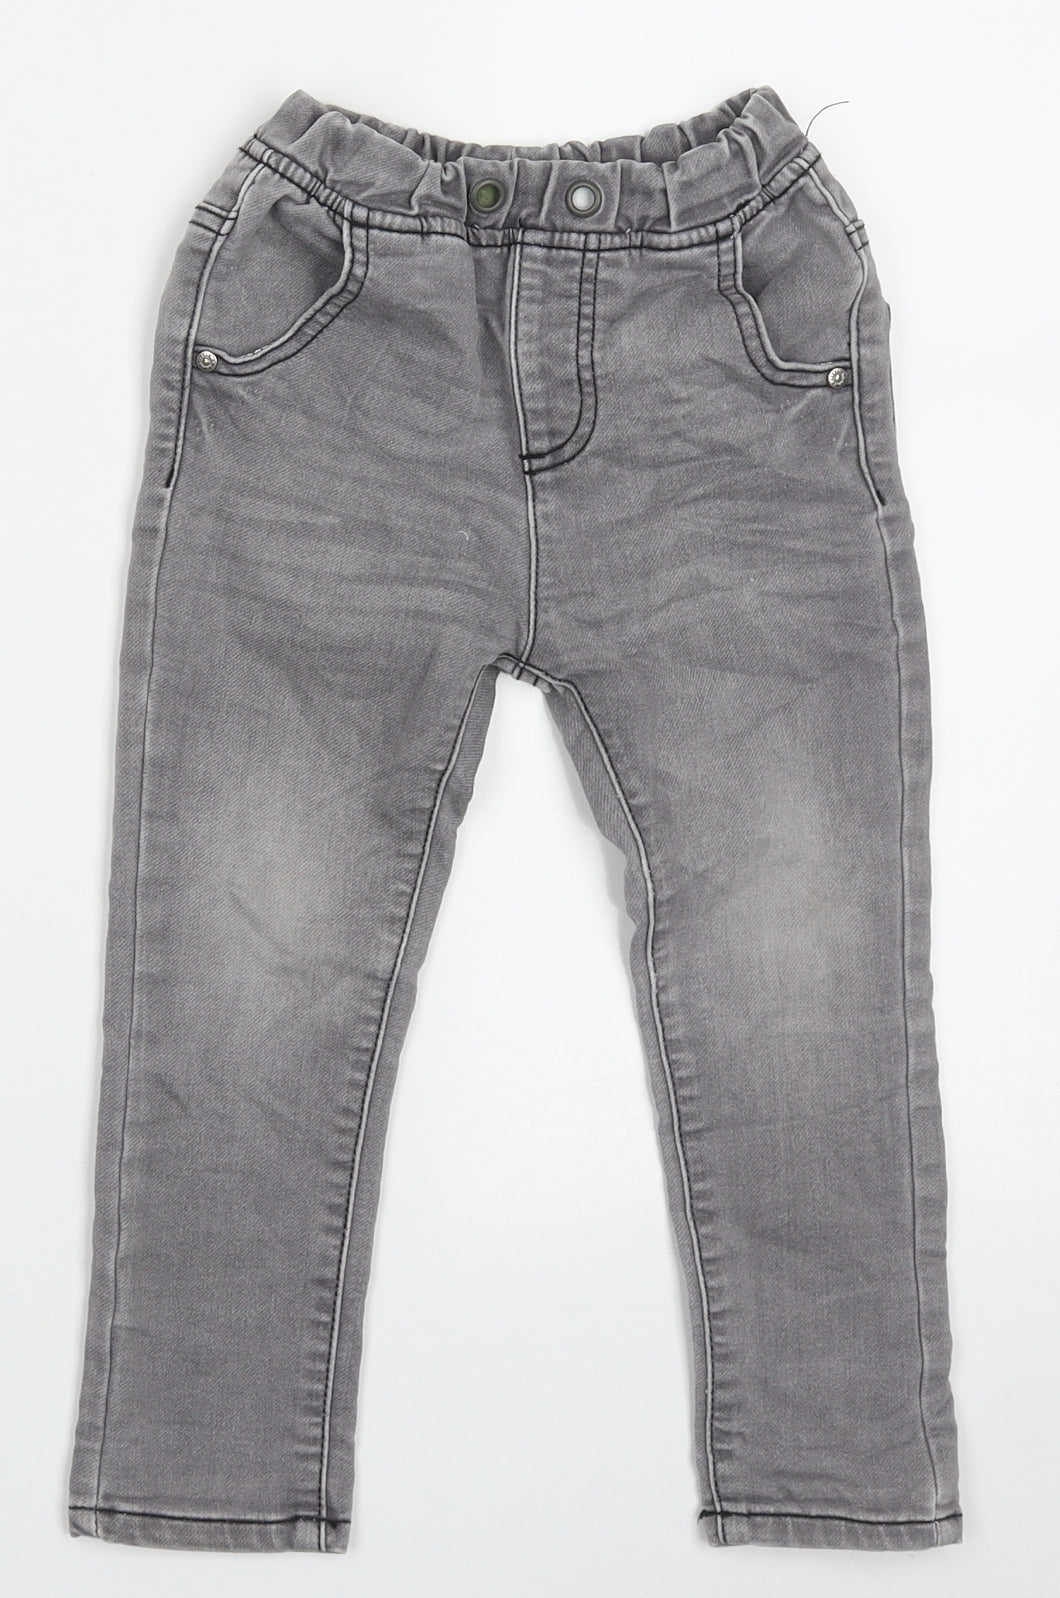 Dunnes Stores Boys Grey  Cotton Straight Jeans Size 2-3 Years  Regular